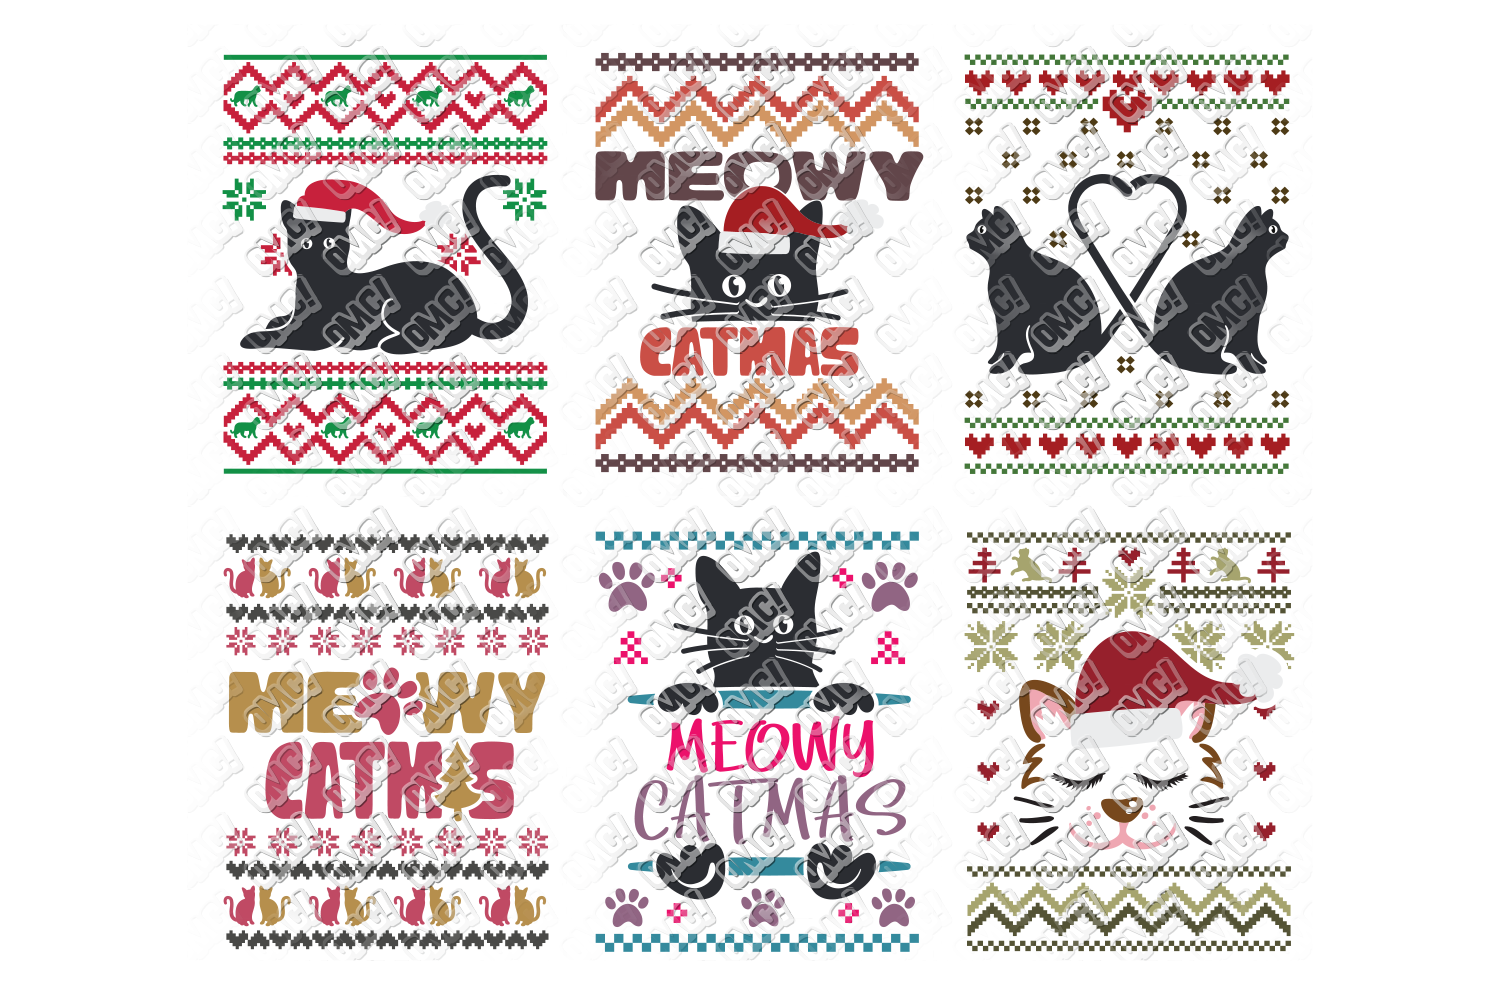 Cat Ugly Christmas SVG Sweater in SVG, DXF, PNG, EPS, JPEG ...